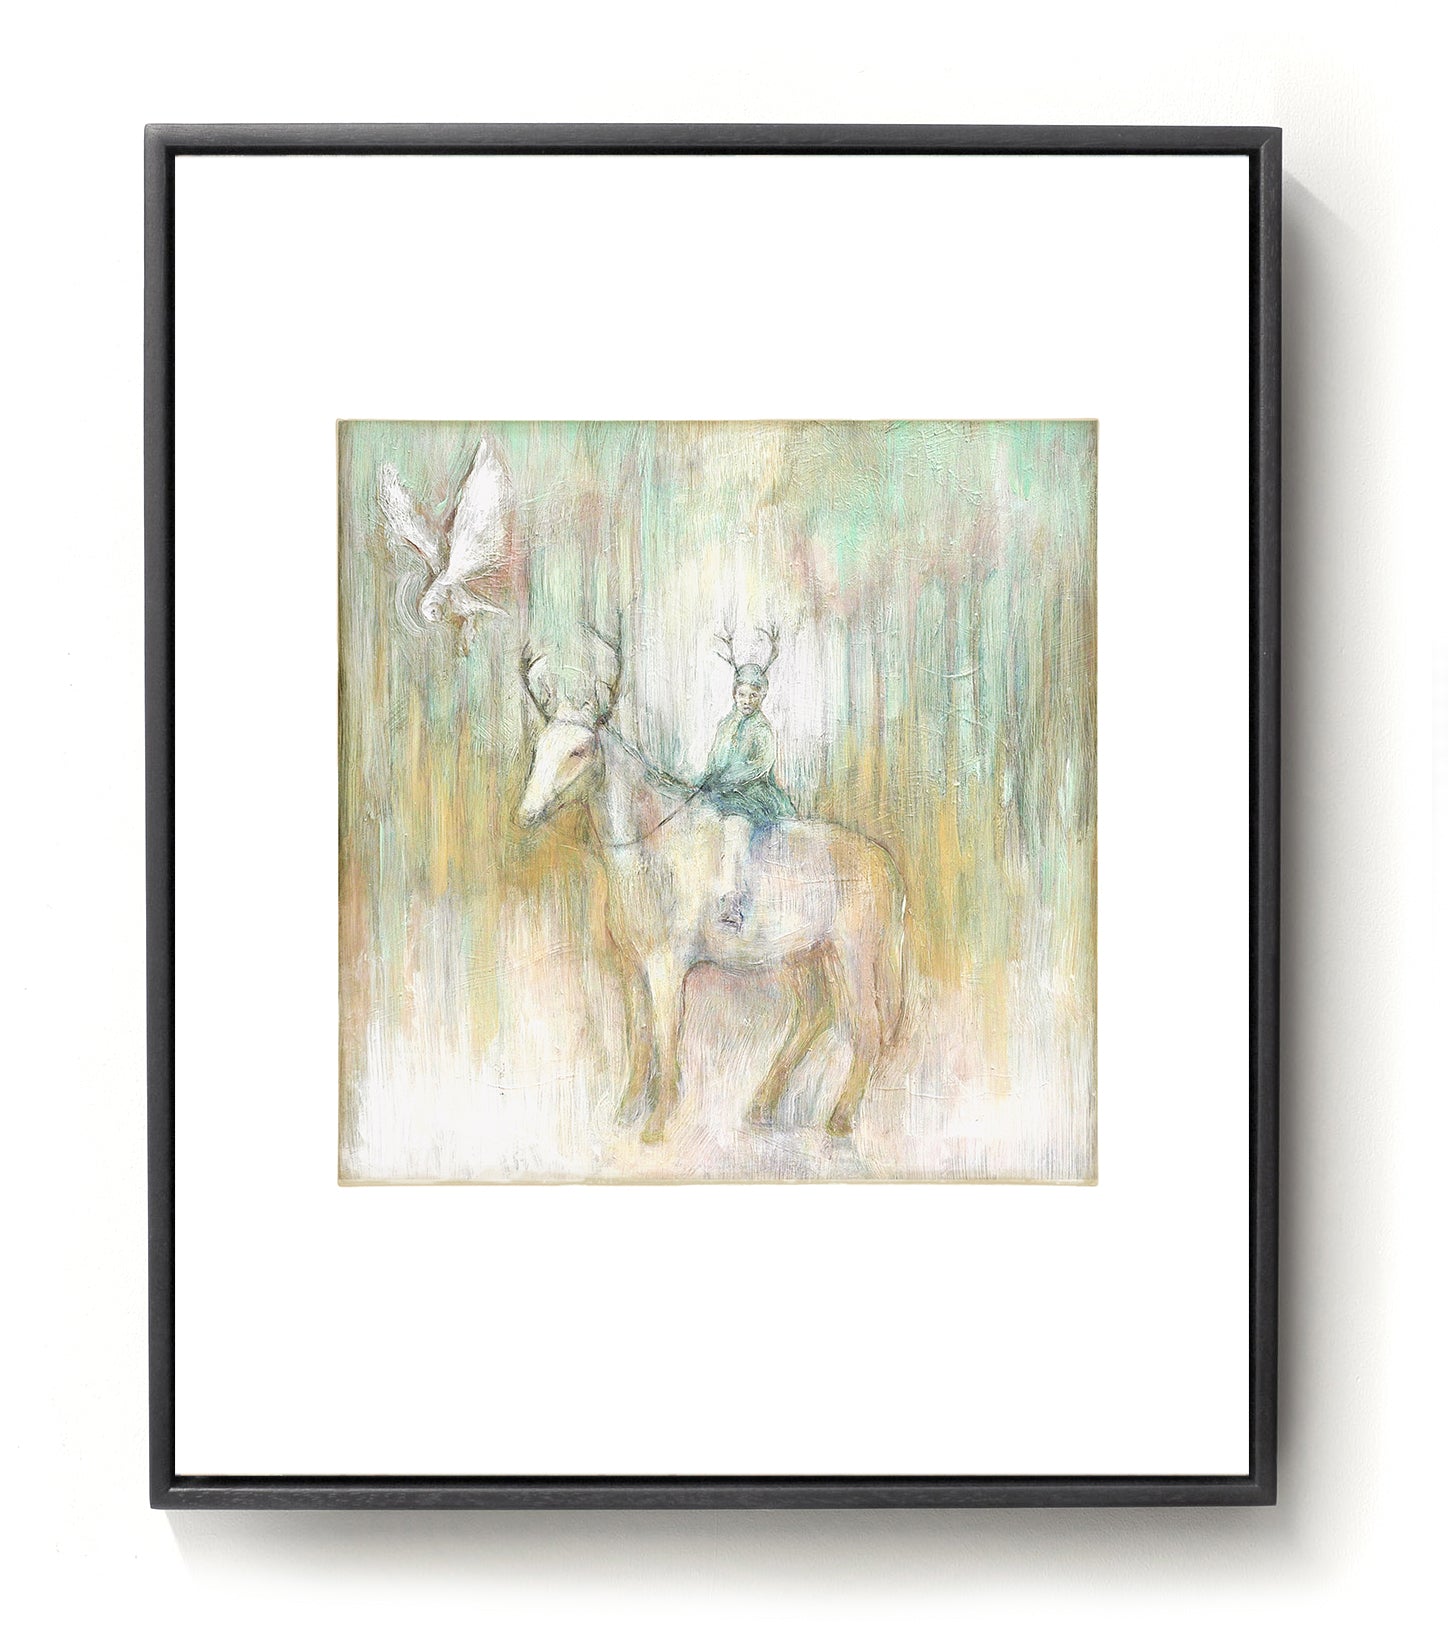 Hand finished giclee print of a flying owl and a child on horseback, both with antlers, in gold, green and pale tones.